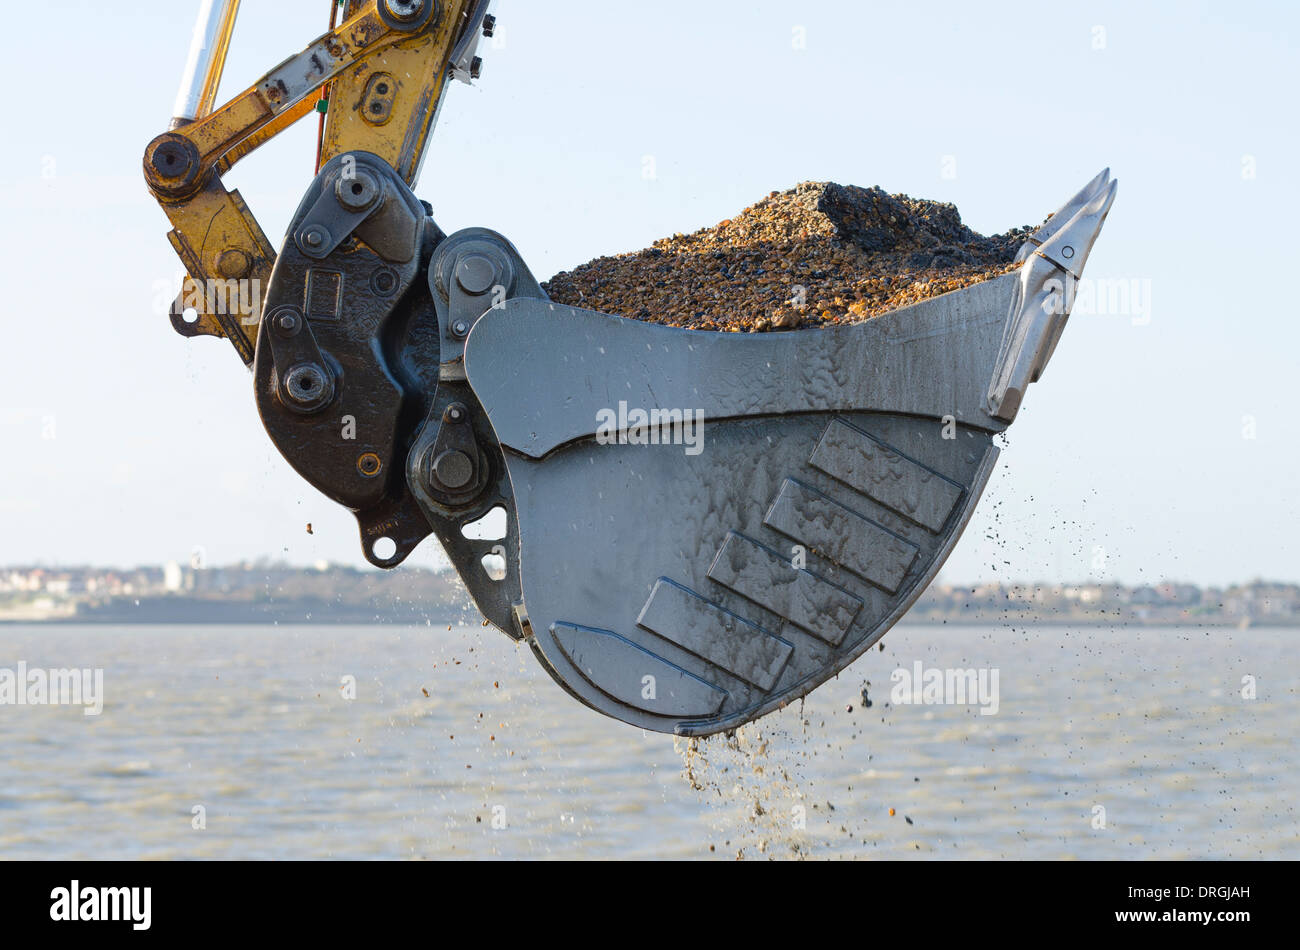 Excavator bucket dredging sand and gravel from the seafront Stock Photo